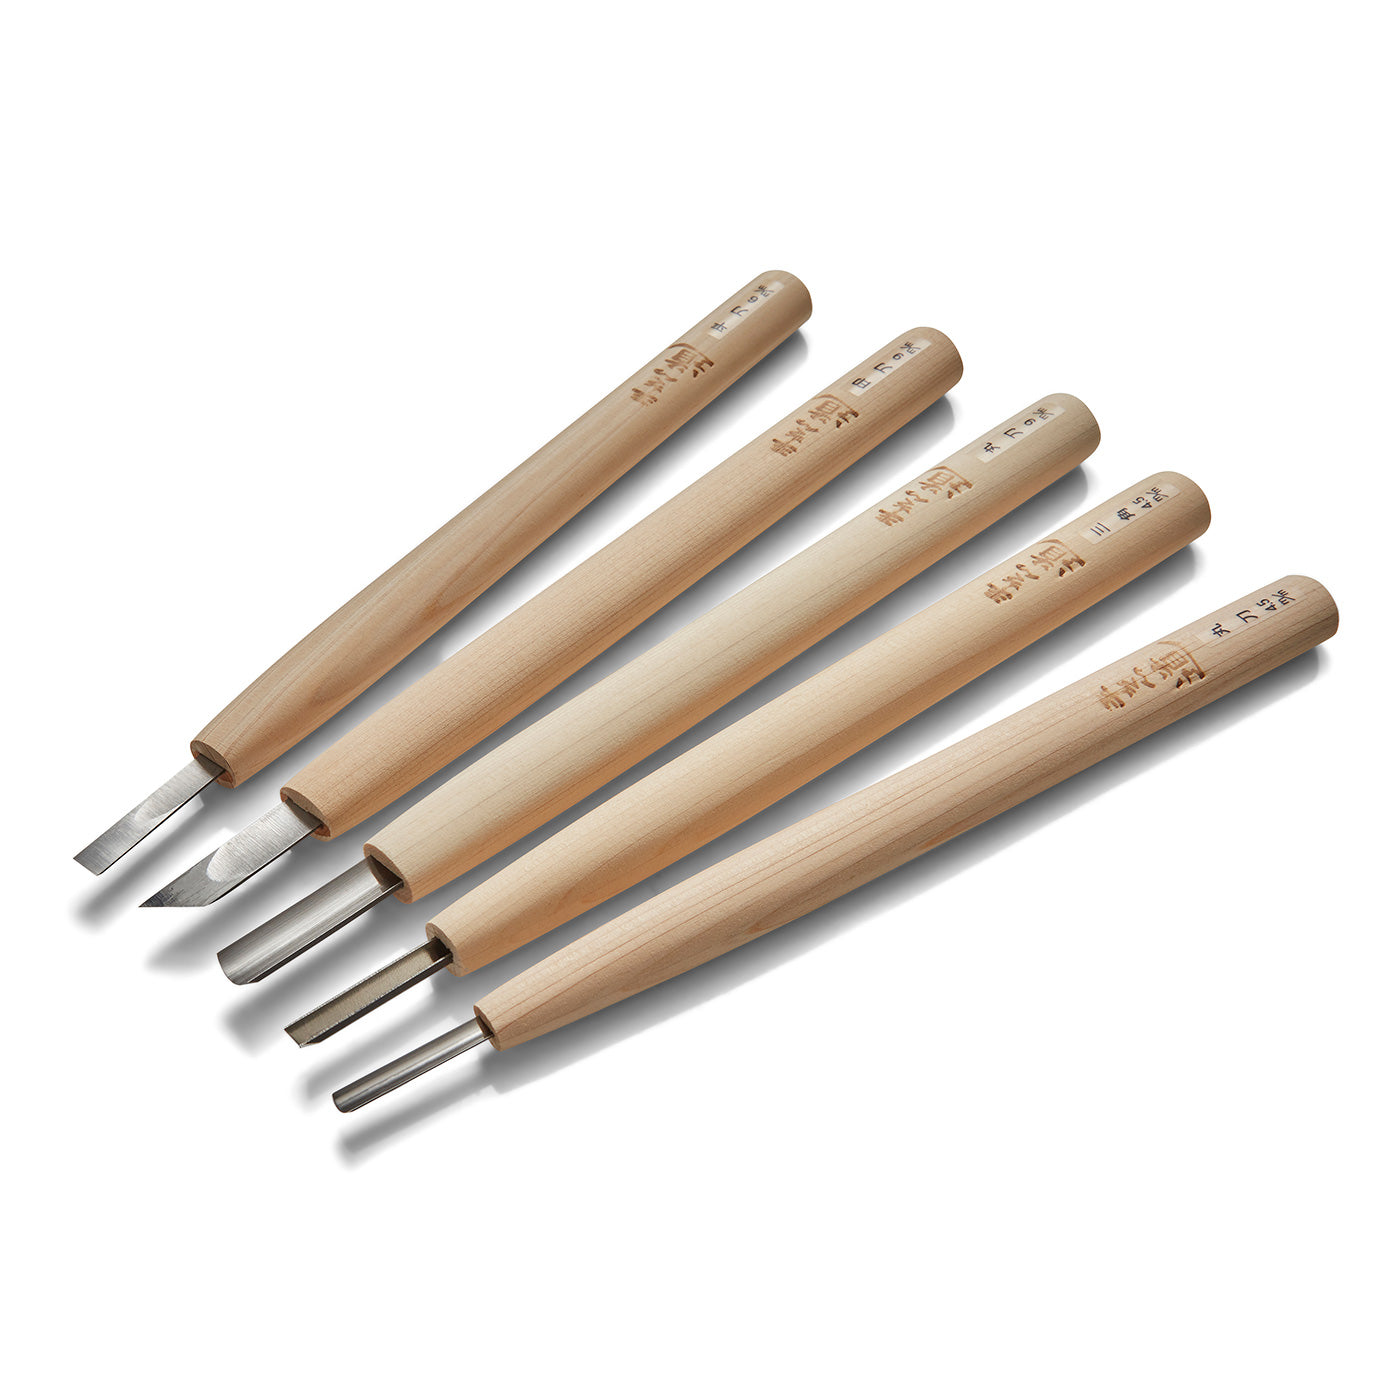 CHICIRIS Full Size Wood Carving Tools 12 Piece Set - Gouges and Chisels for  Beginners, Hobbyists and Professionals featuring Beech Handles, Alloy  Chromium Vanadium Steel Blades and Wood Case 